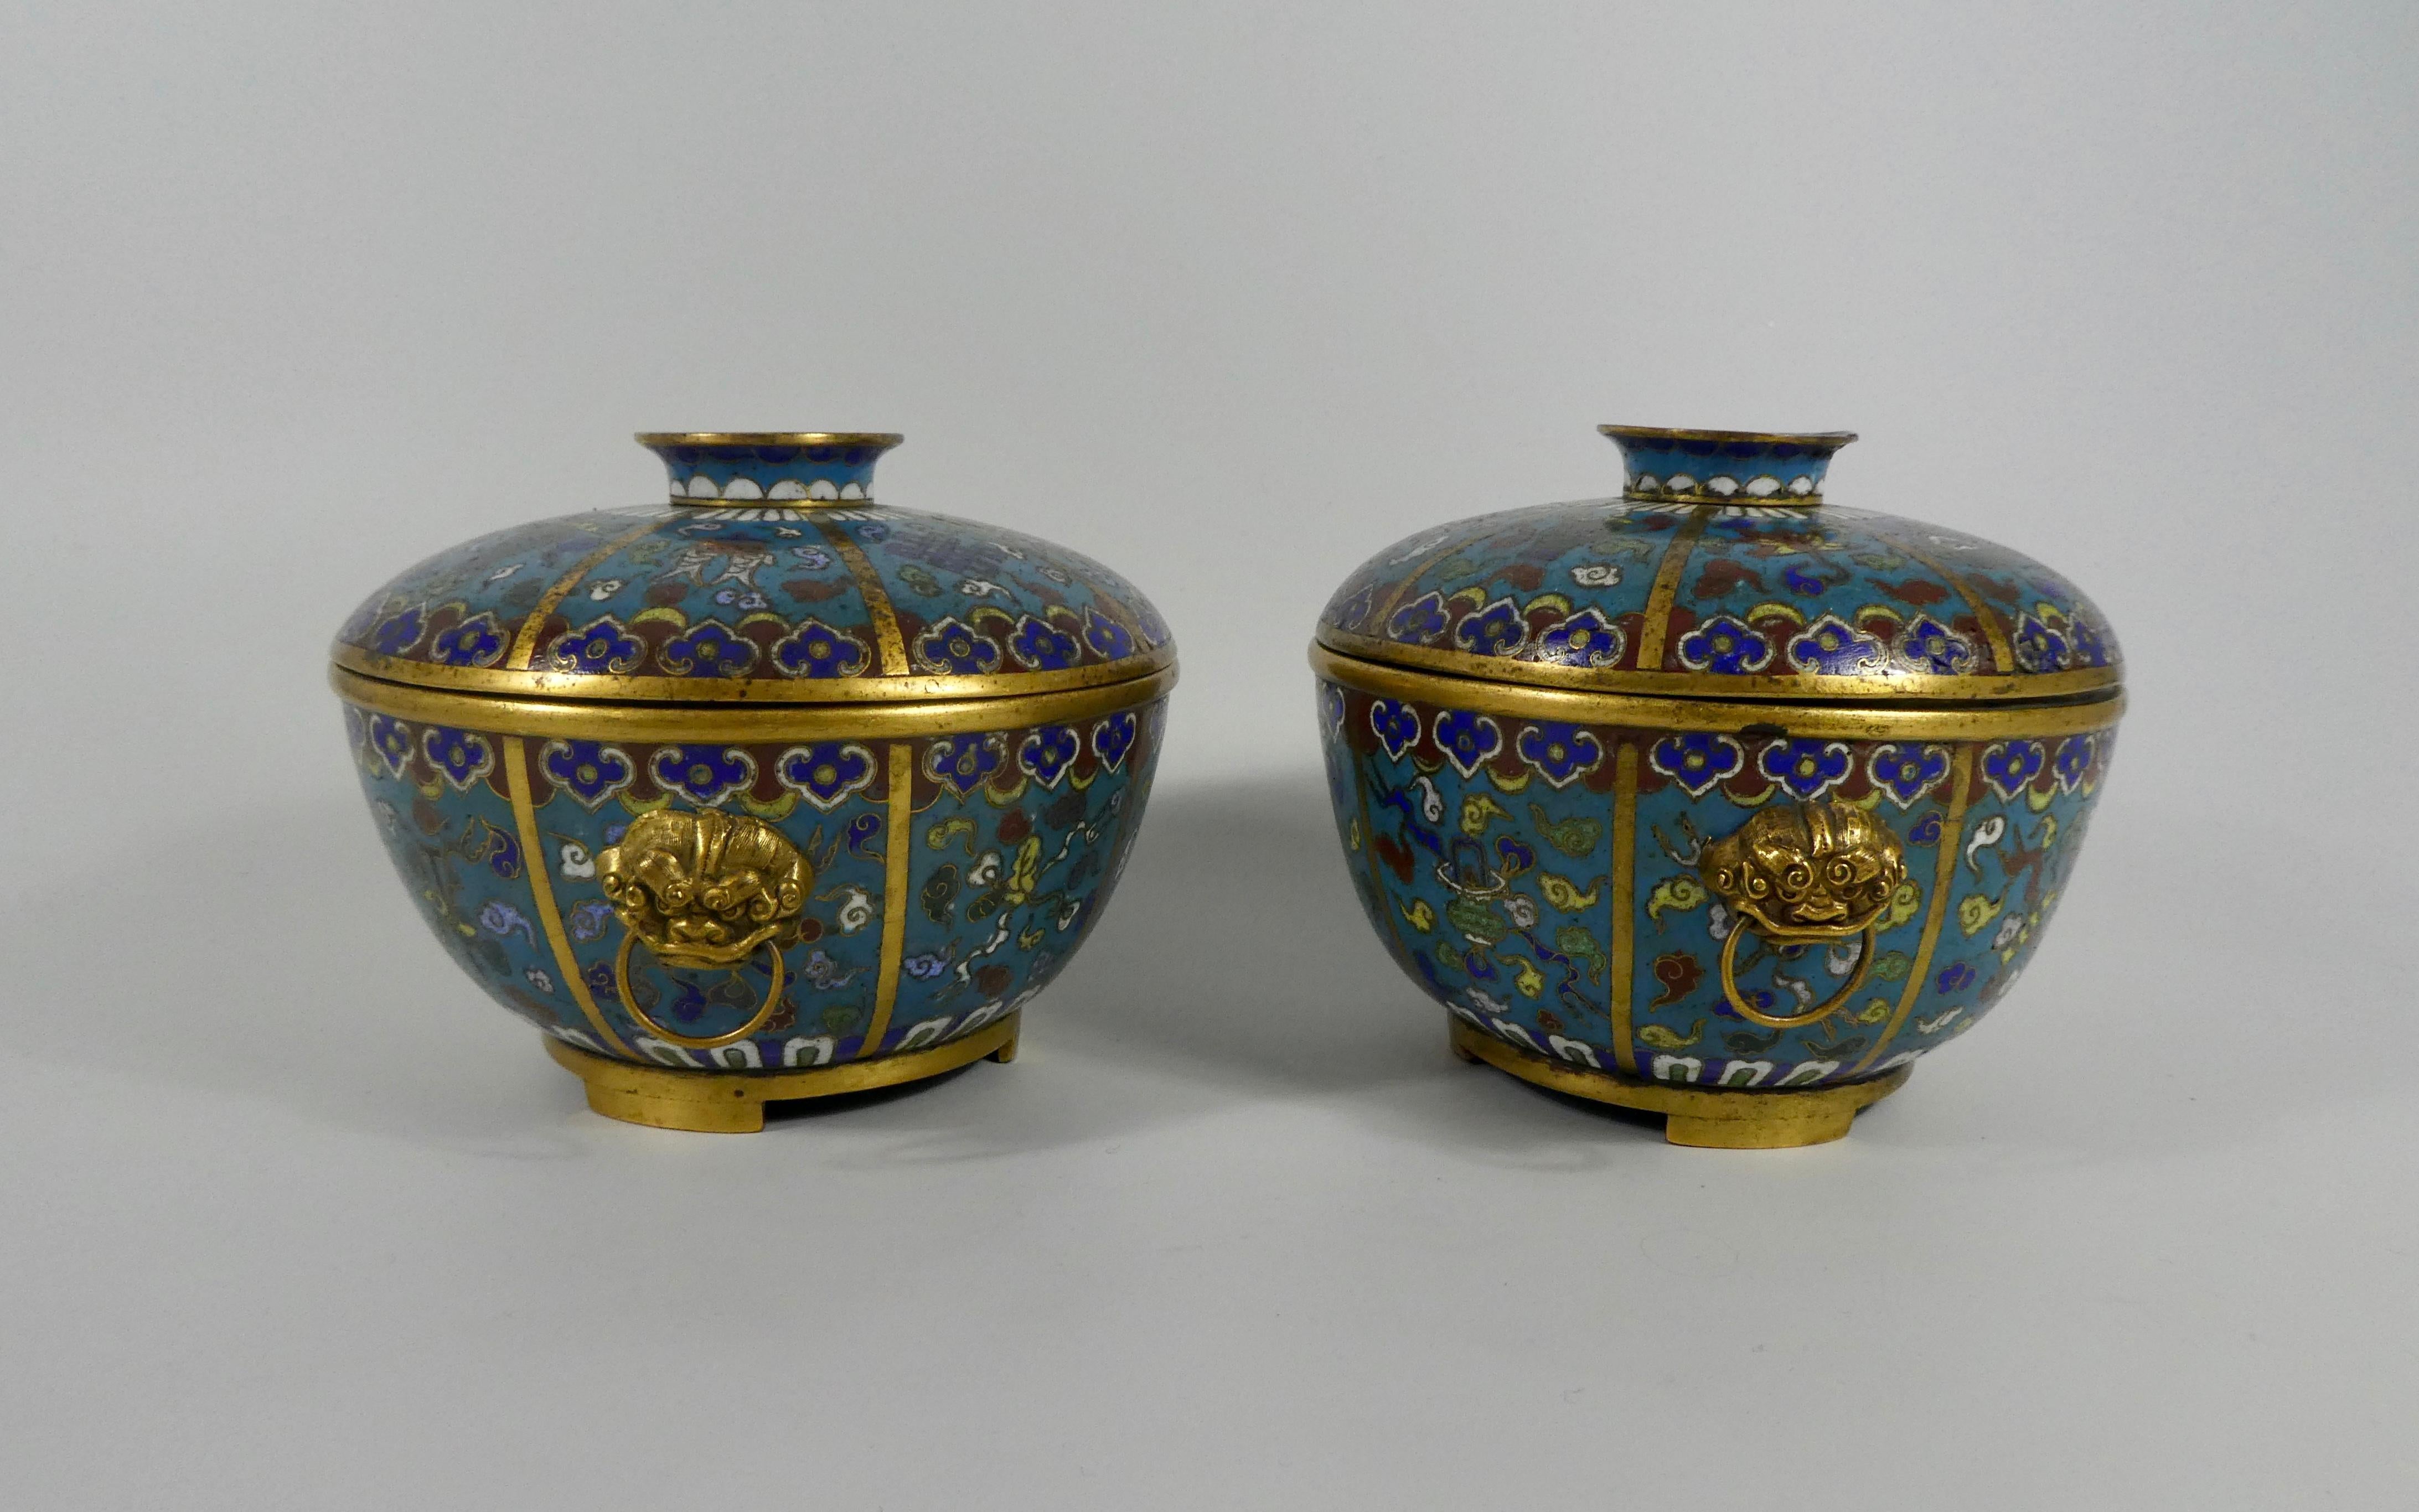 Pair of Chinese cloisonne bowls and covers, 19th century, Qing dynasty. Both bowls enameled with the ‘Eight Buddhistic Symbols’, in gilt wires, on a turquoise ground, within gilt metal panels, and continuous ruyi head, and lappet borders. Having